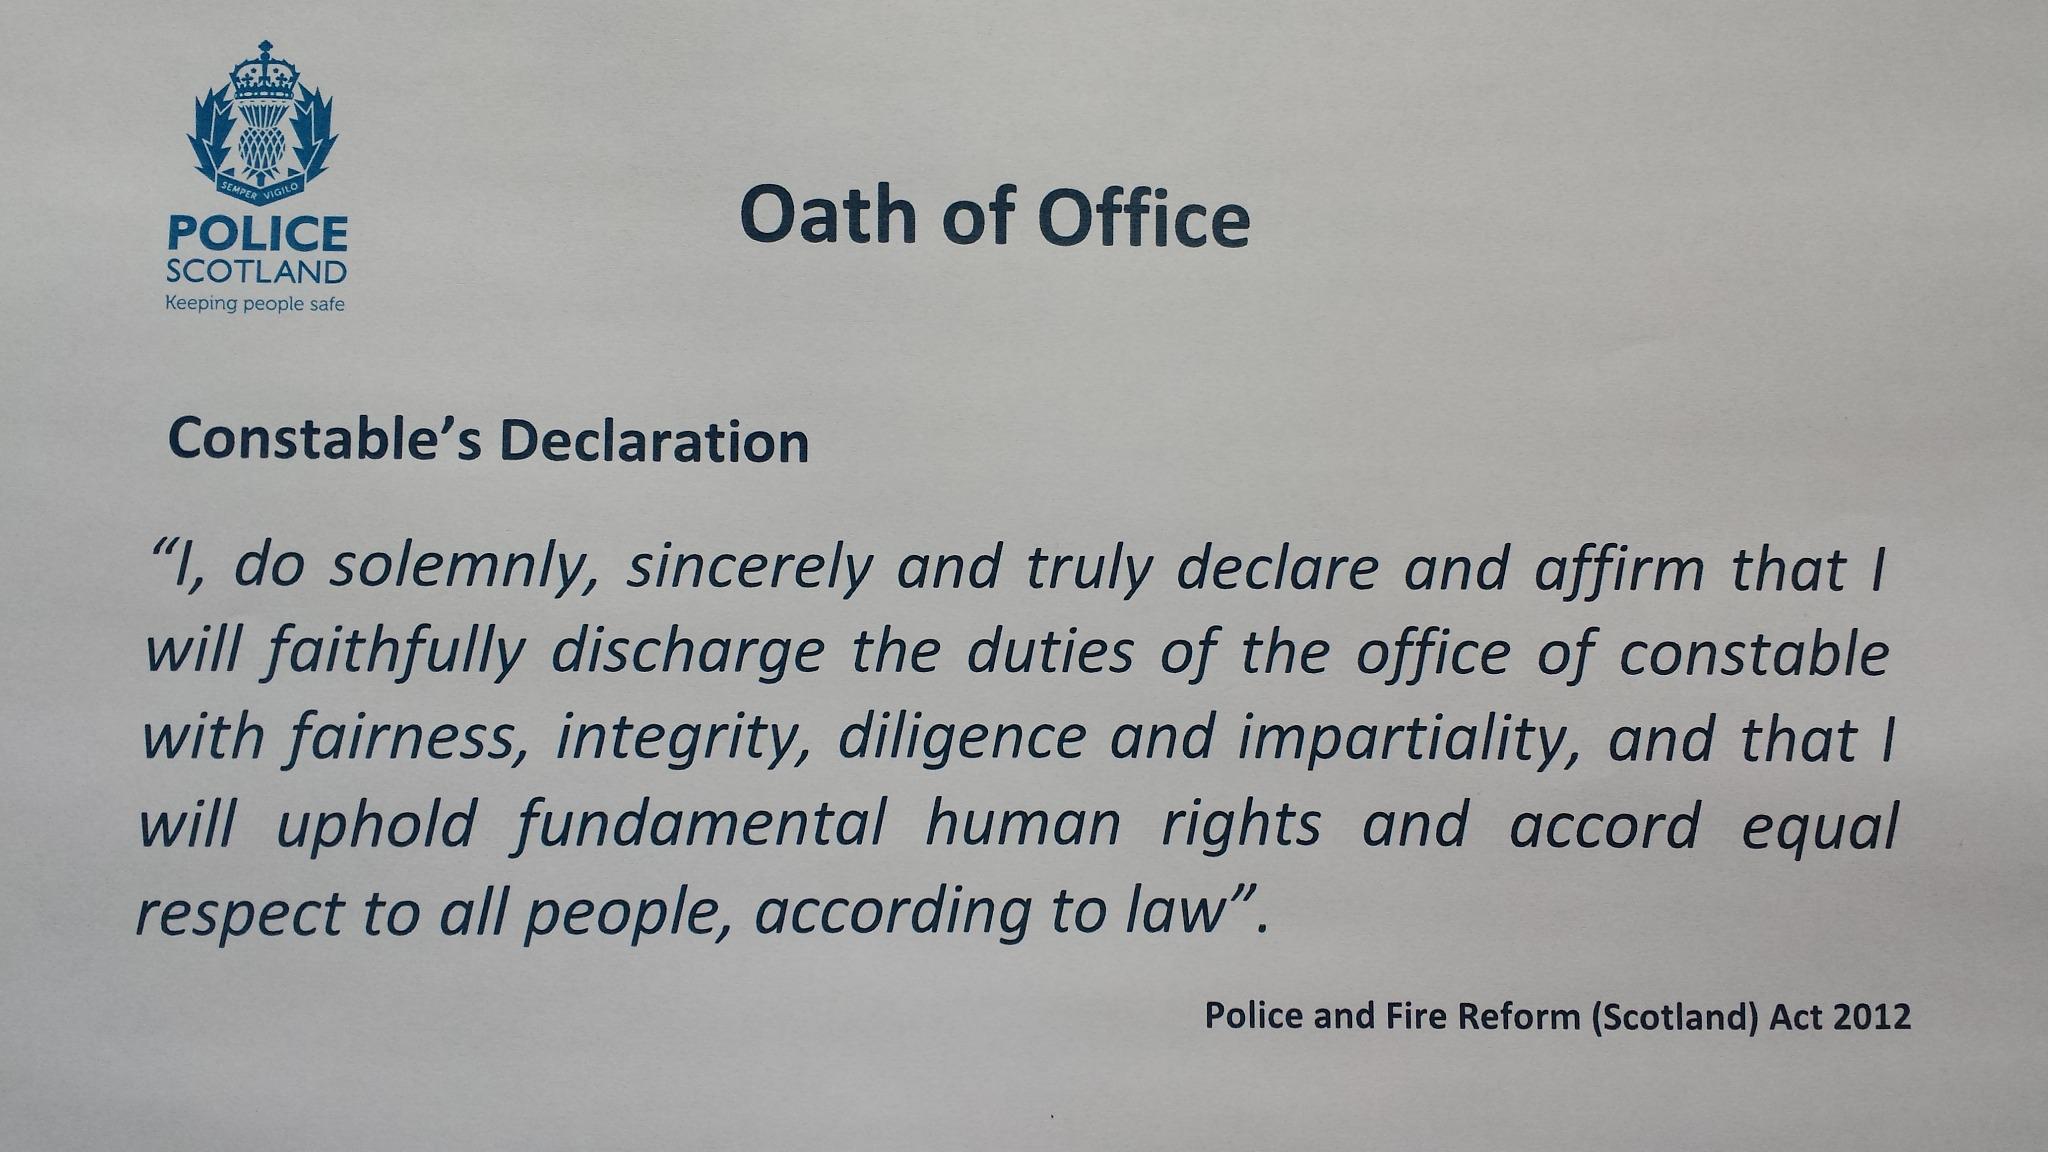 Police Scotland College The Police Scotland Oath Of Office Declaration Morethanjustwords Http T Co Eq8zxldzpt